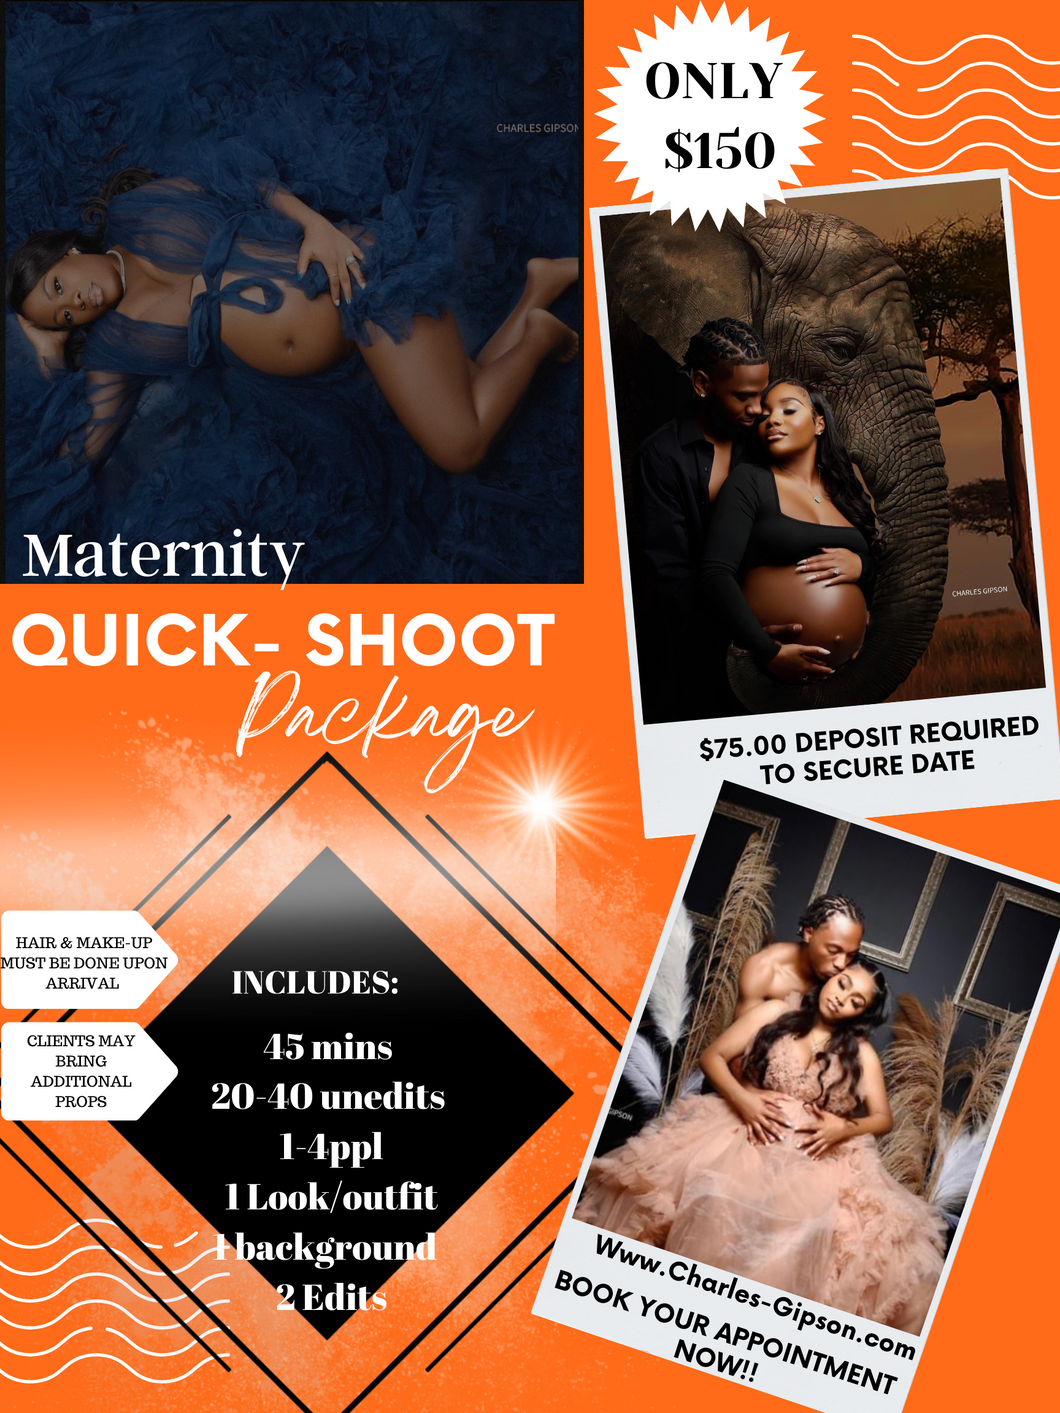 Maternity Quick-shoot (1-4PPL ONLY!) $150.00 In Studio